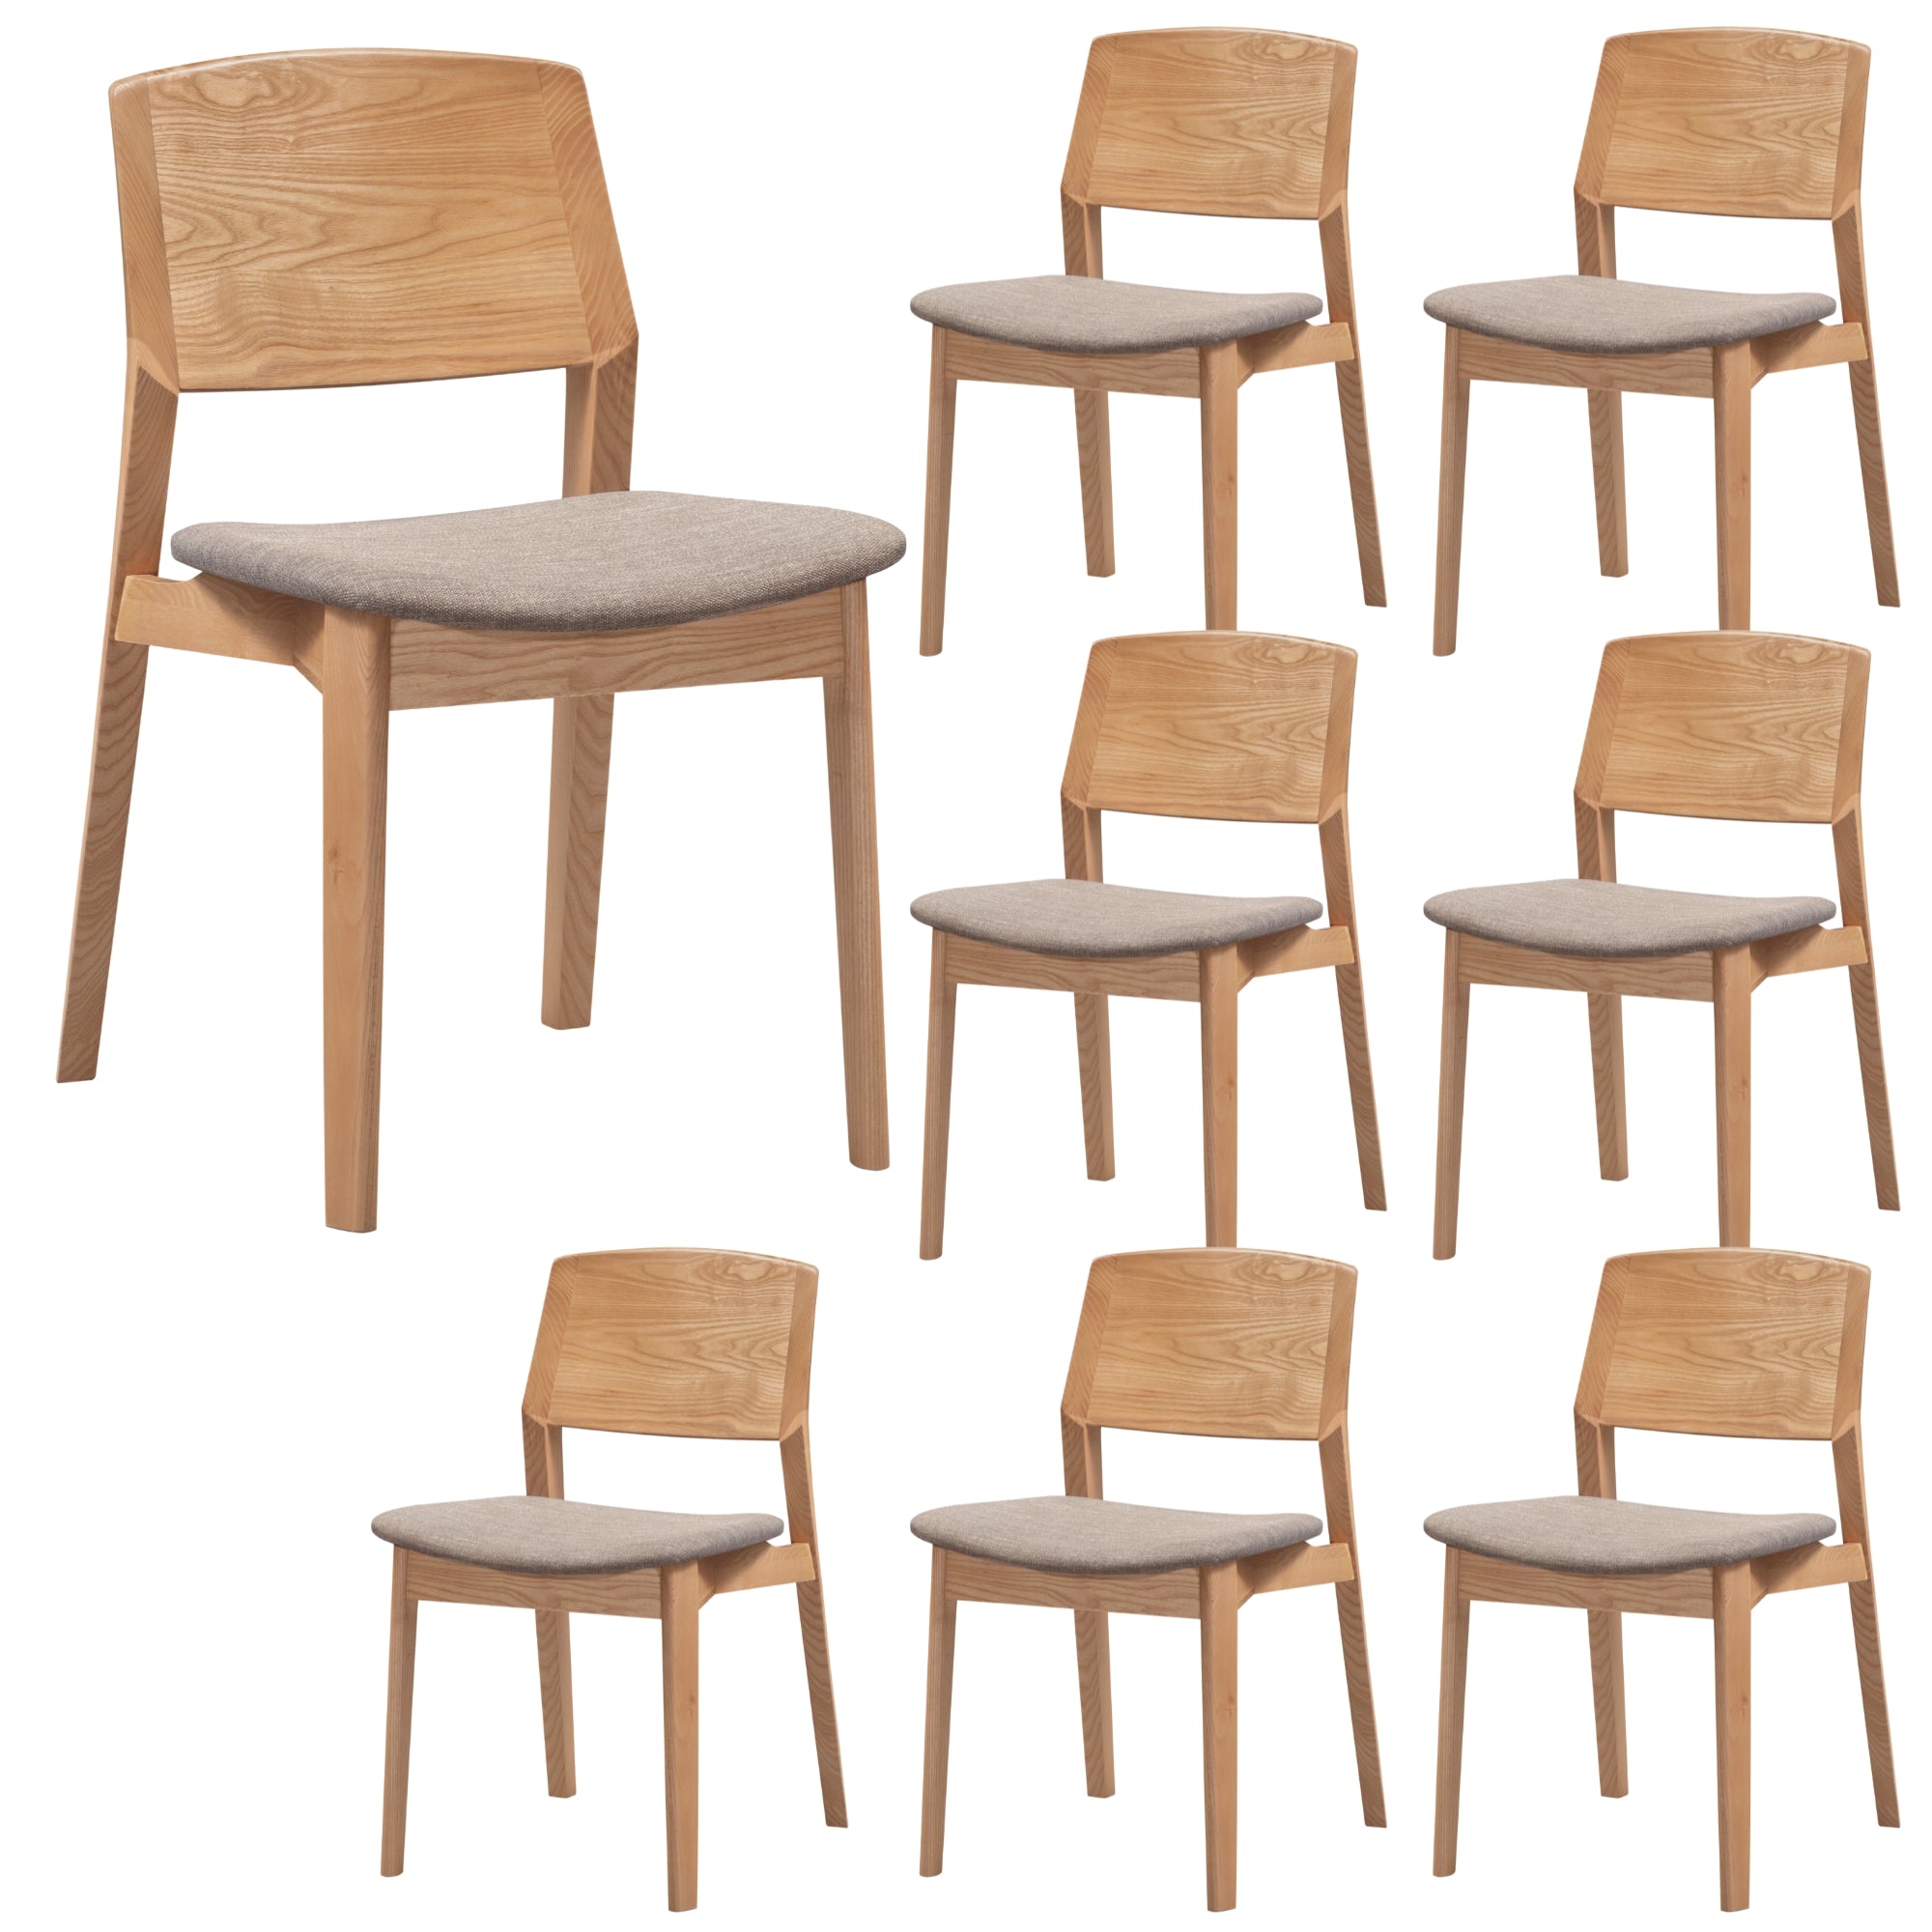 8pc Solid Ash Wood Dining Chairs, Grey Fabric Upholstery